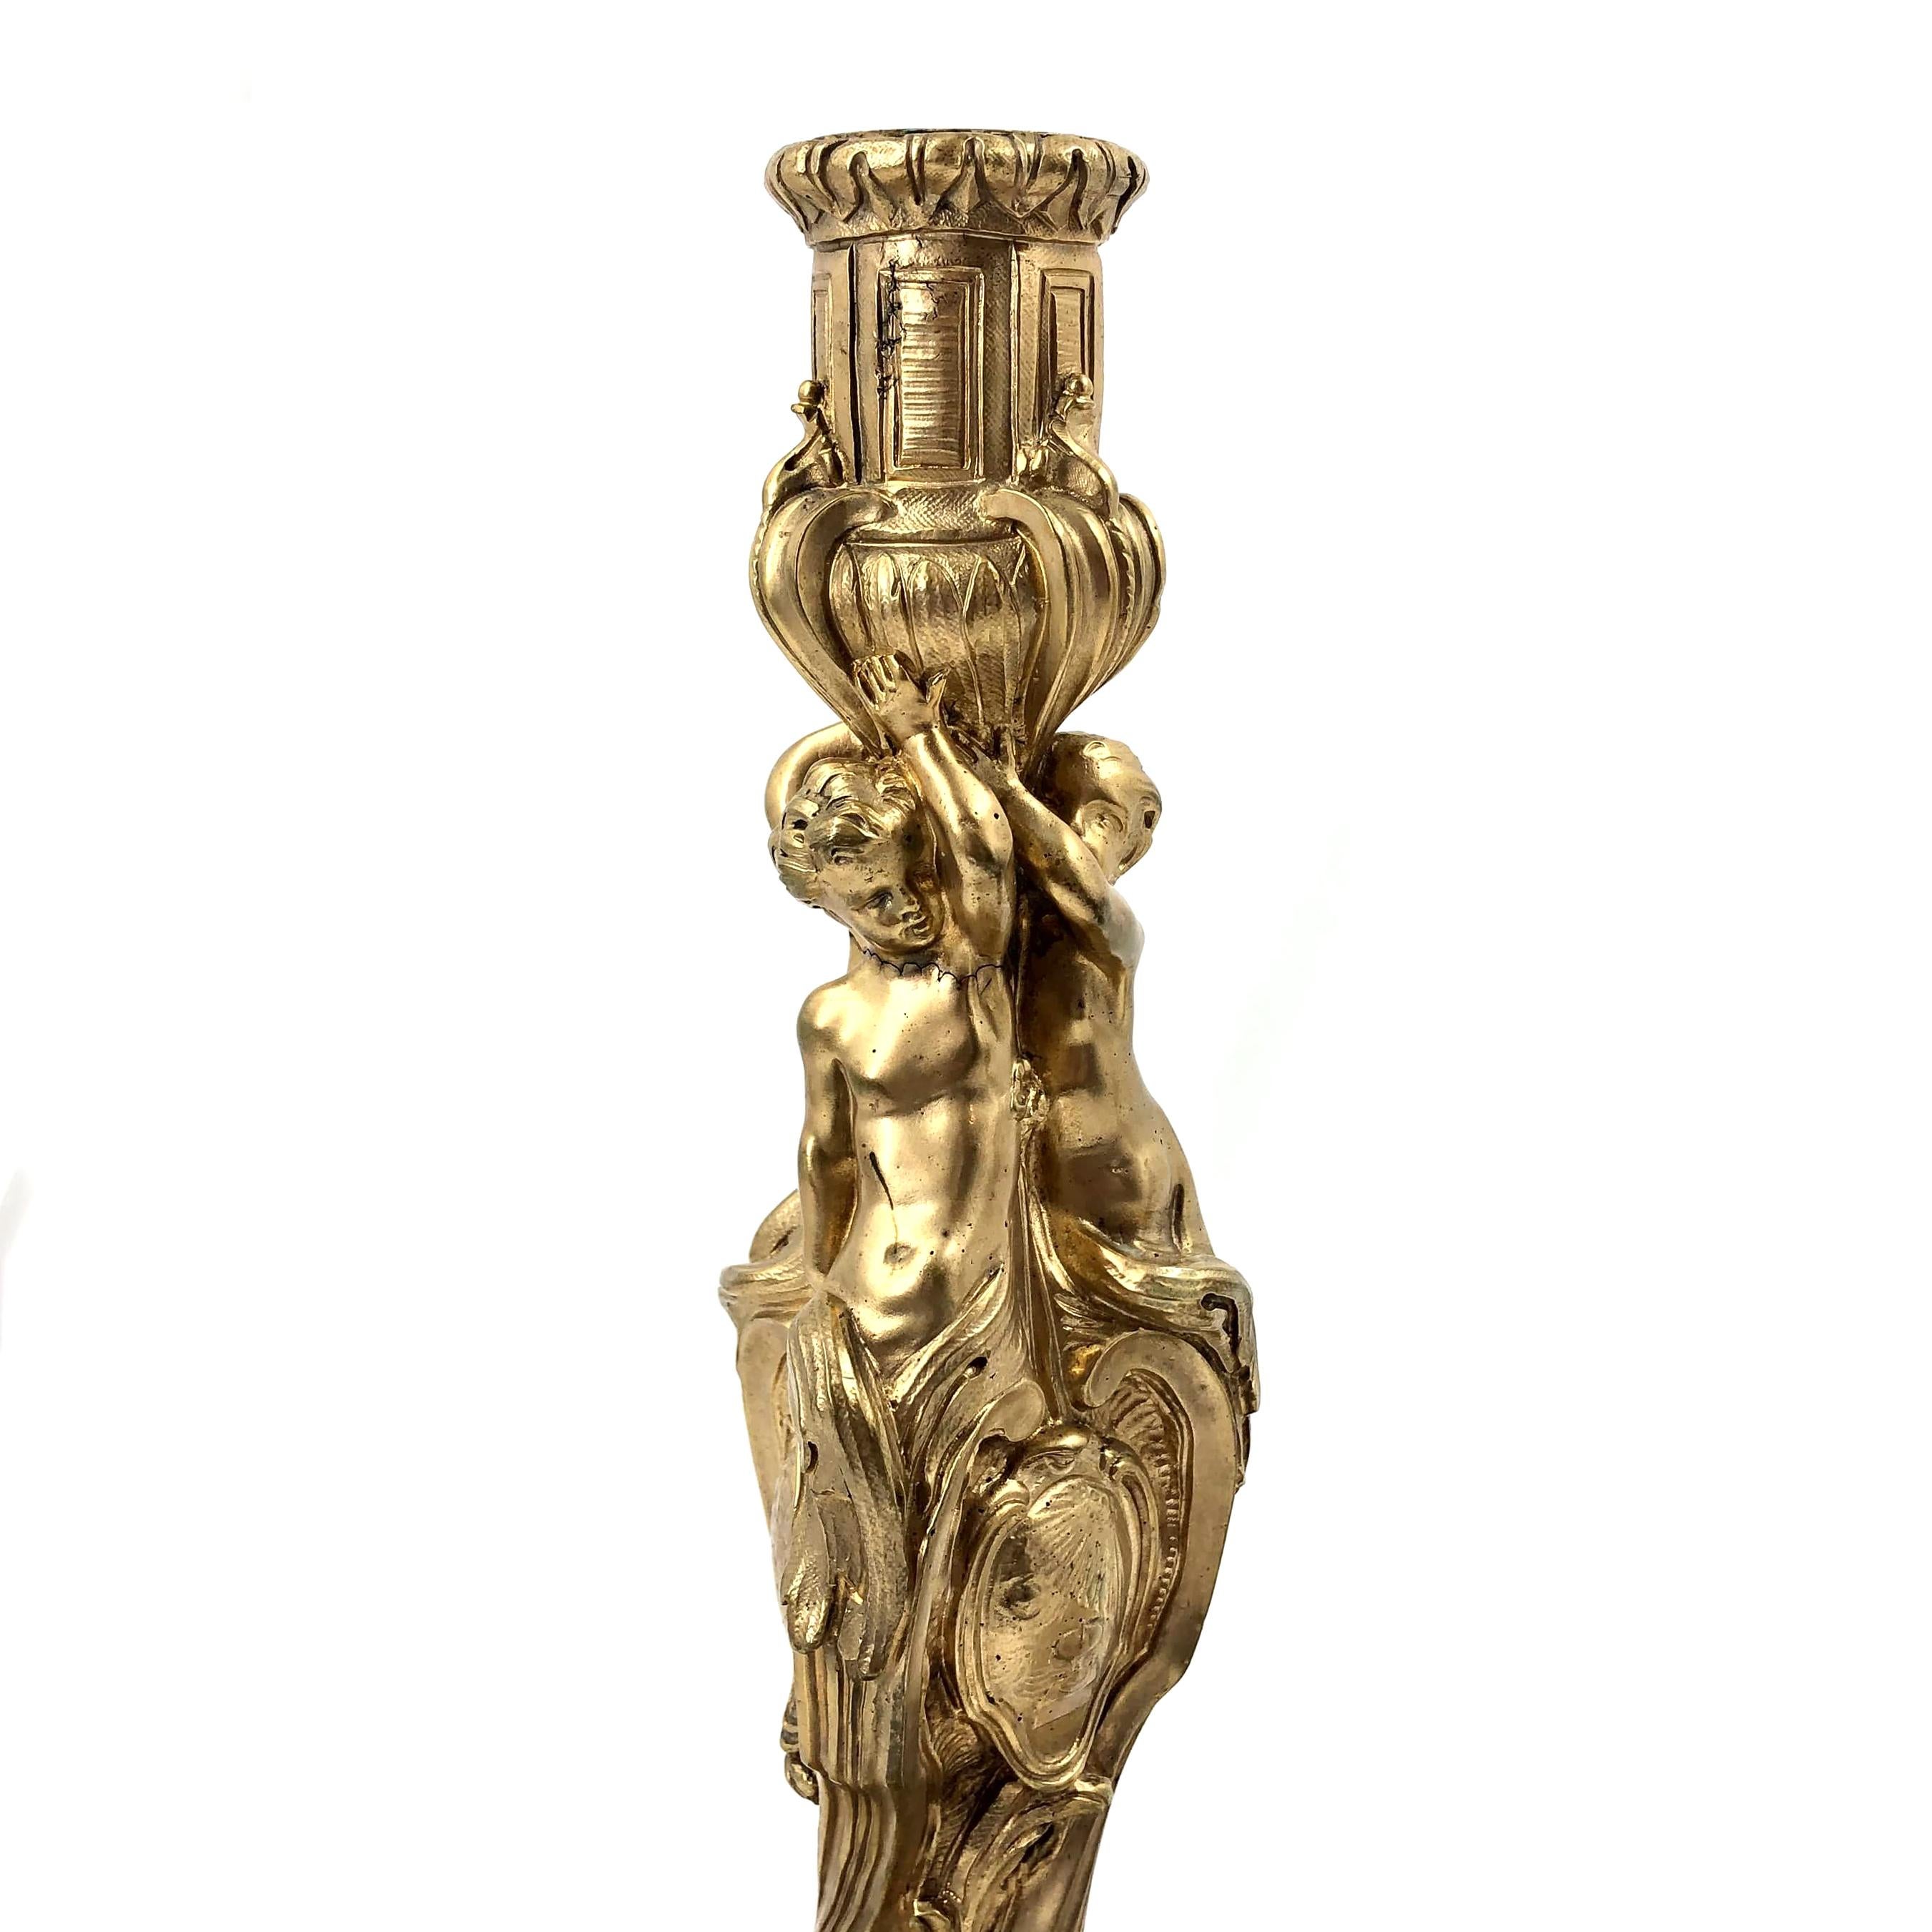 A fine pair of French Louis XV gilt bronze figural candlesticks in the manner of Meissonier. Beautifully decorated and chased with leaves and two Putti perched on the stem holding the cup above their heads.